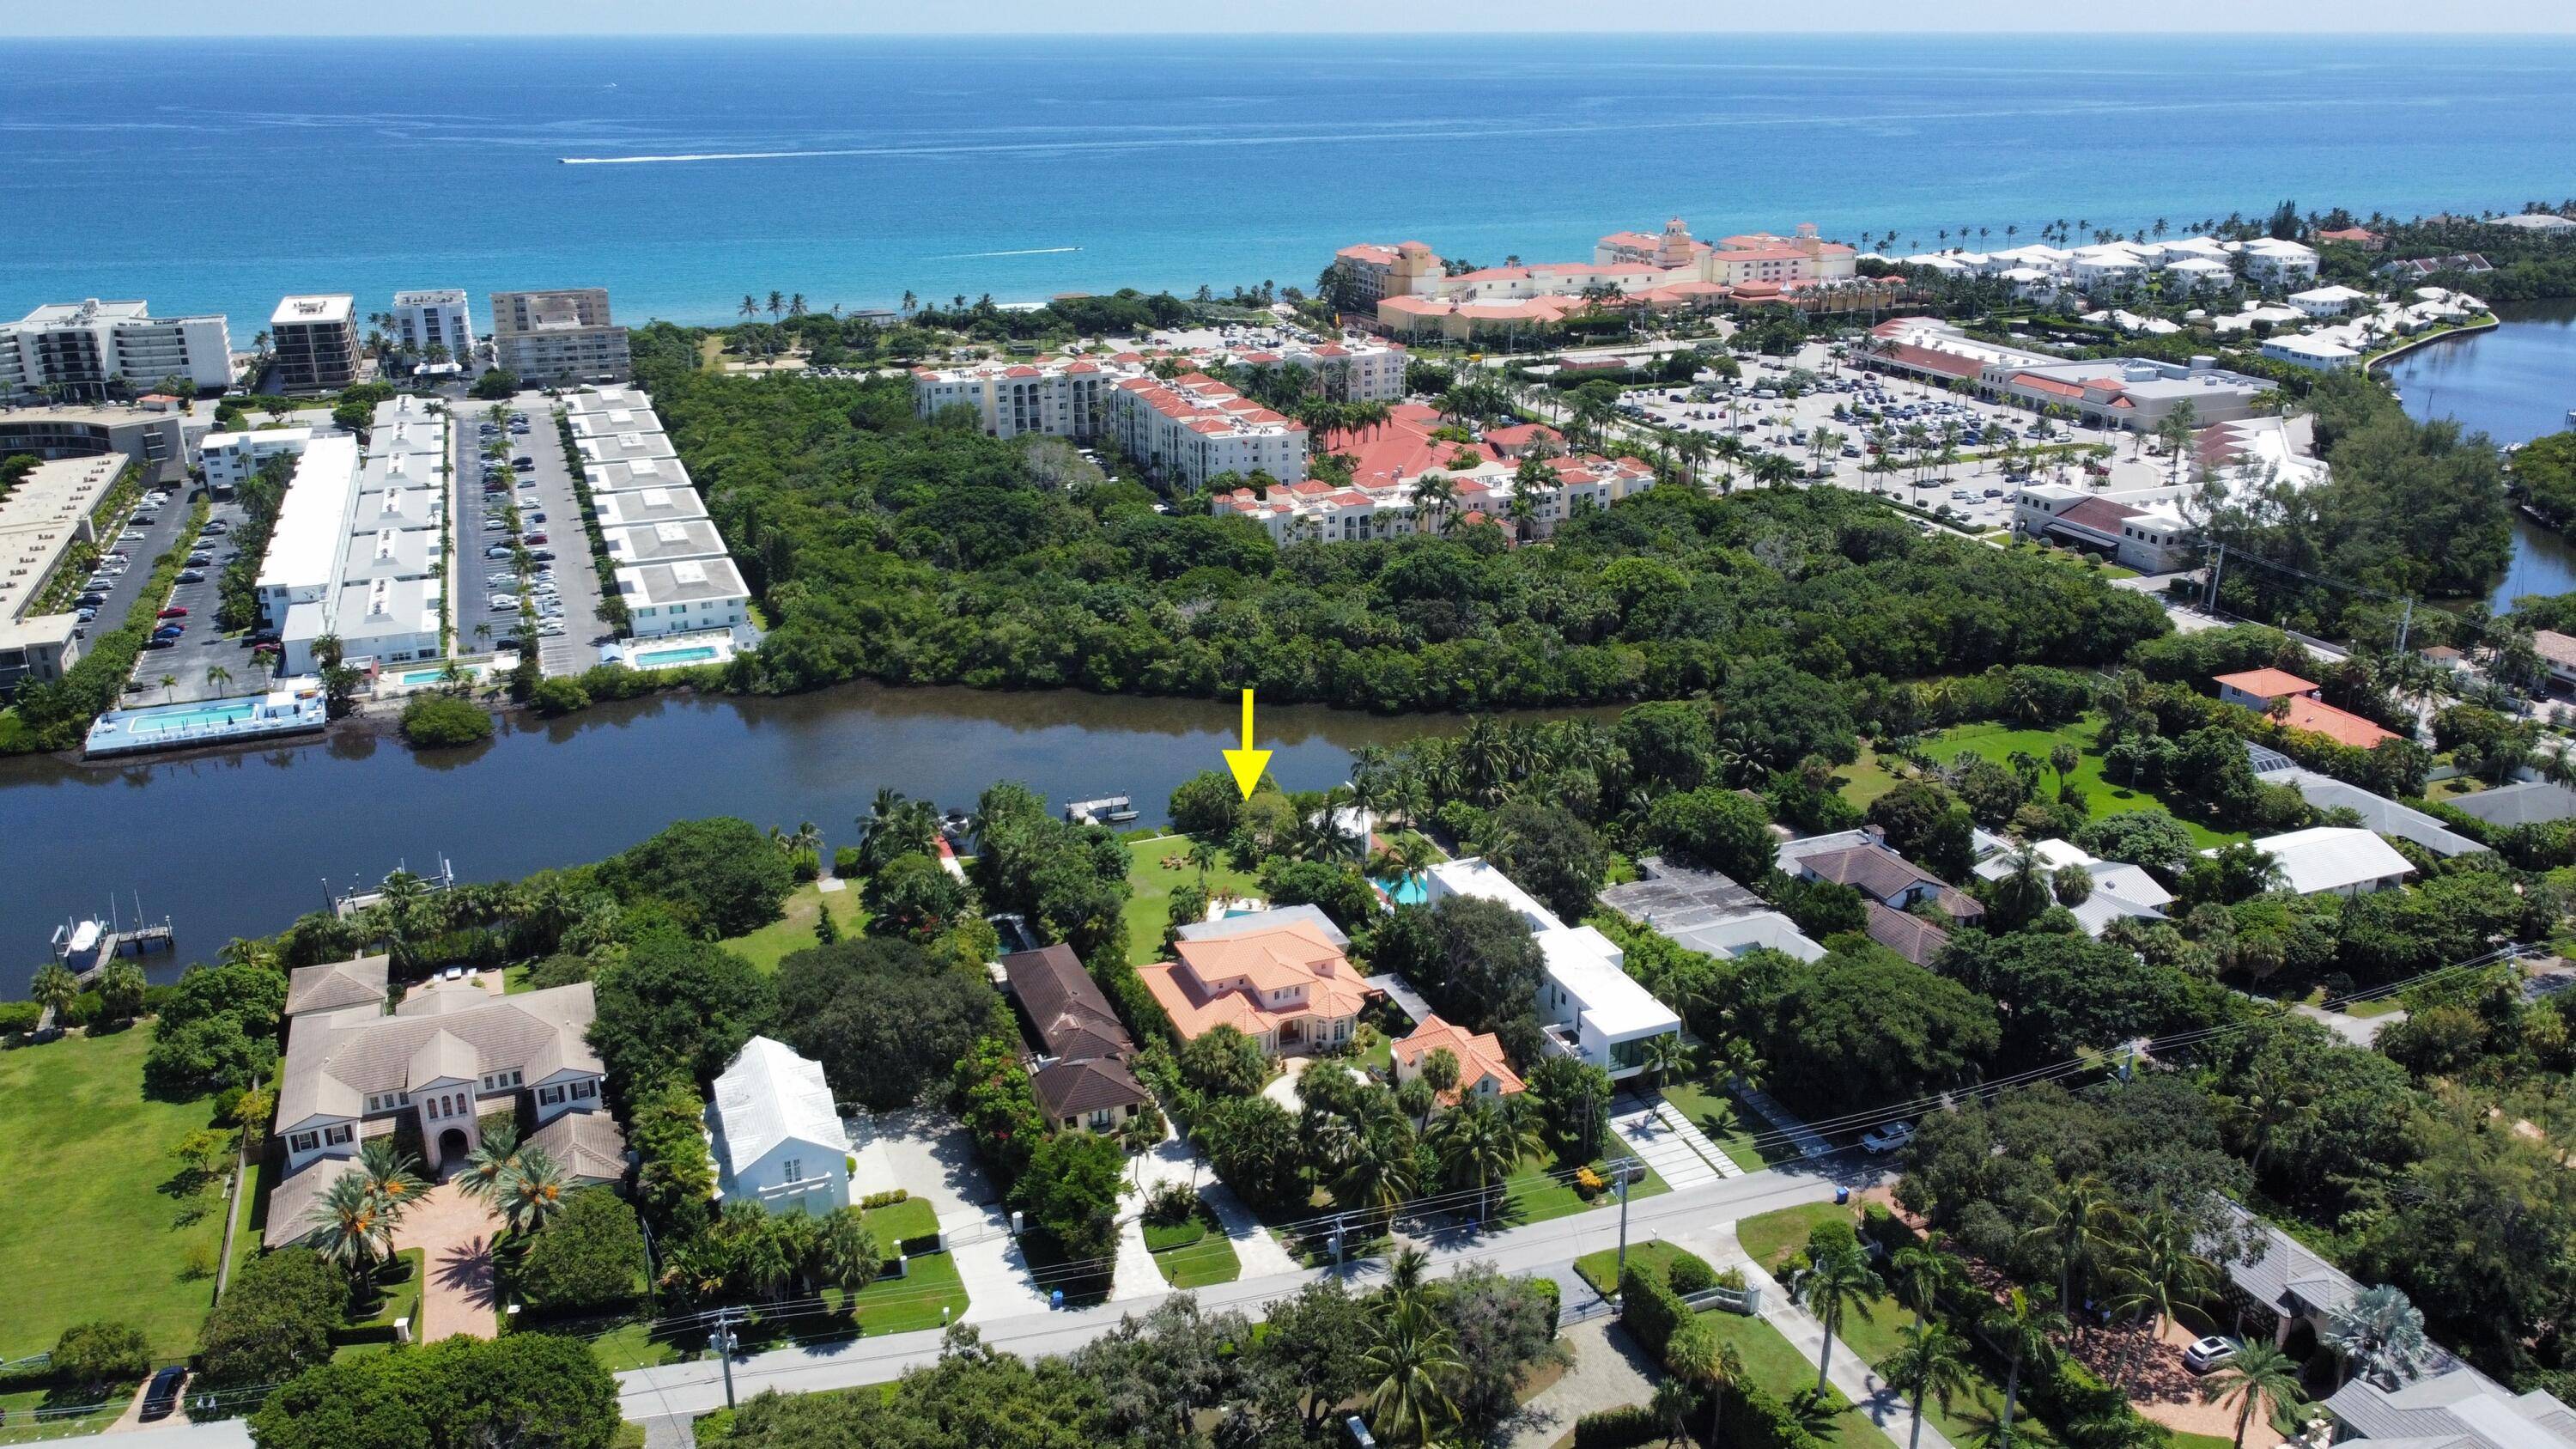 Enjoy peace, privacy, and the ocean breeze from this sprawling 5 bedroom waterfront estate.